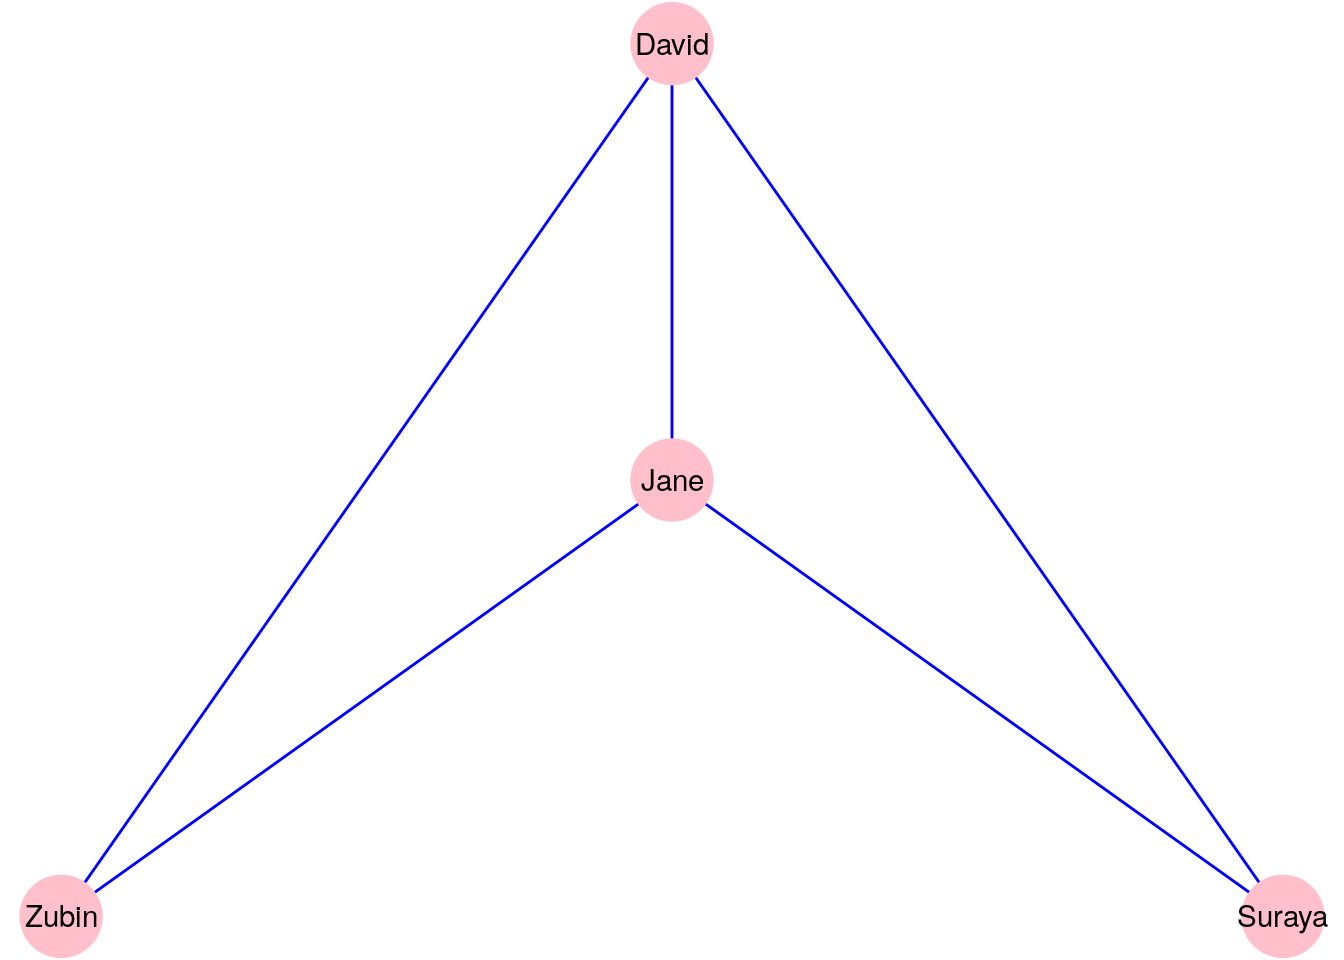 A graph $G_\mathrm{work}$ consisting of four people connected according to whether they have worked together